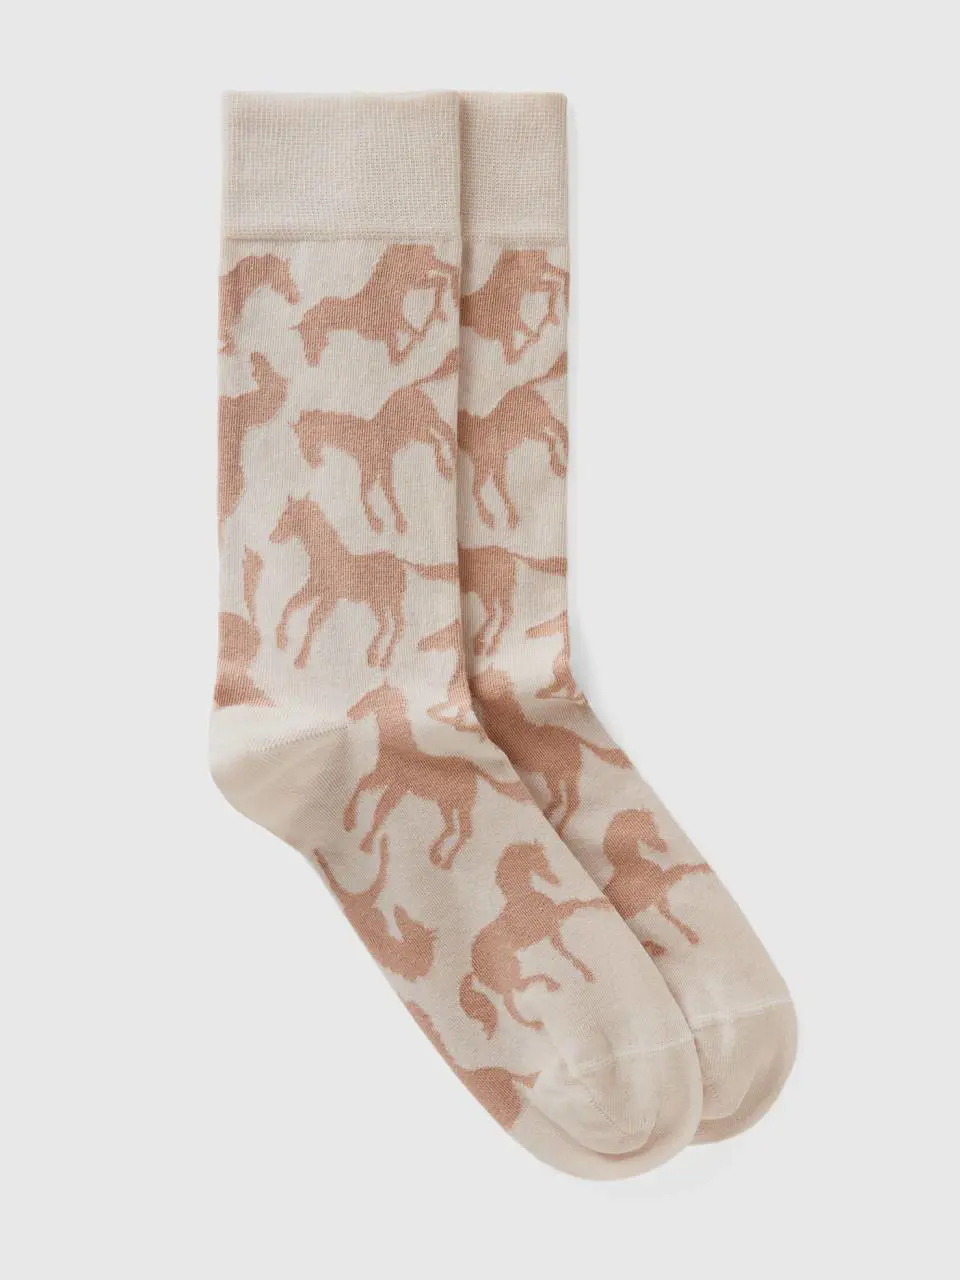 Benetton long pink socks with horses. 1